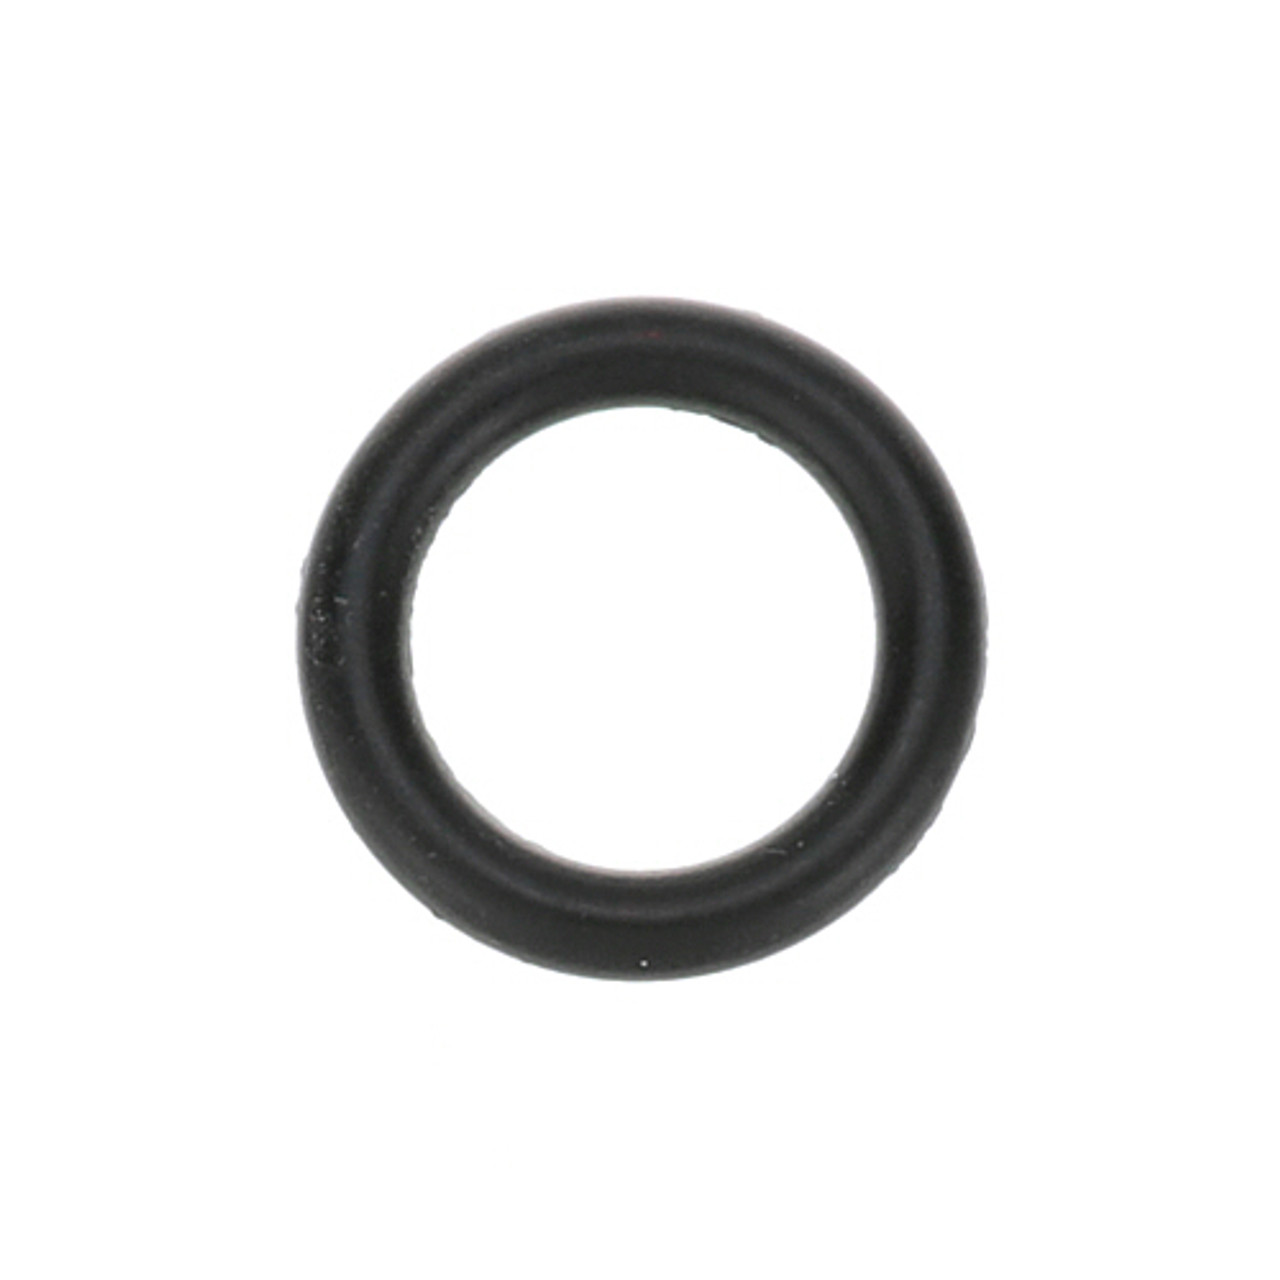 O-Ring 7/16" Id X 3/32" Width - Replacement Part For Groen GR9034